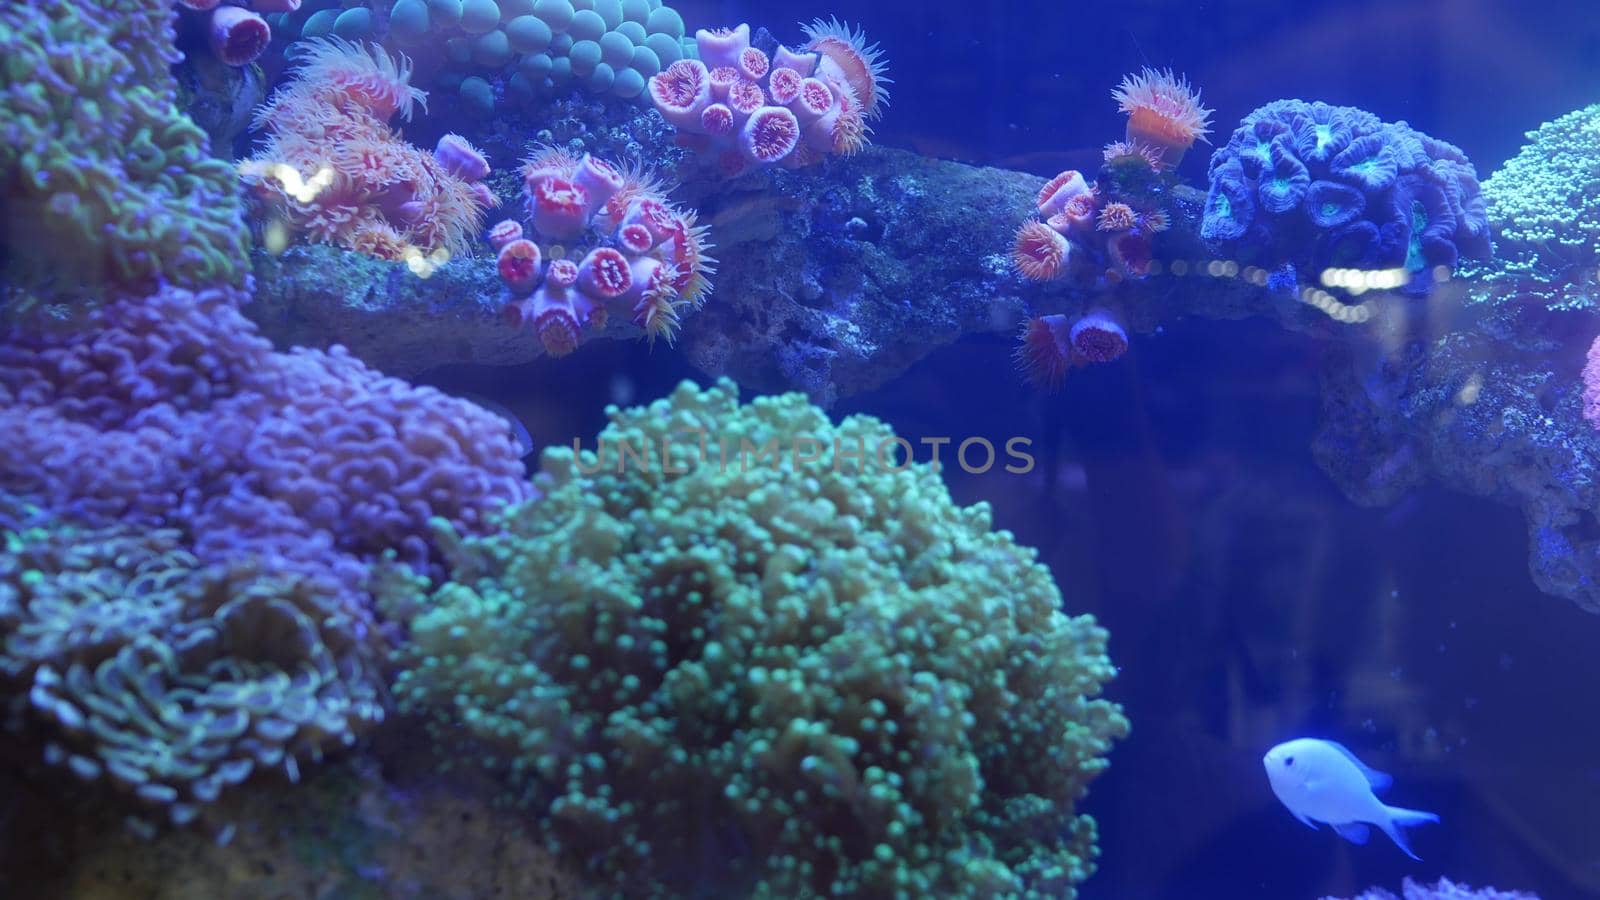 Species of soft corals and fishes in lillac aquarium under violet or ultraviolet uv light. Purple fluorescent tropical aquatic paradise exotic background, coral in pink vibrant fantasy decorative tank by DogoraSun